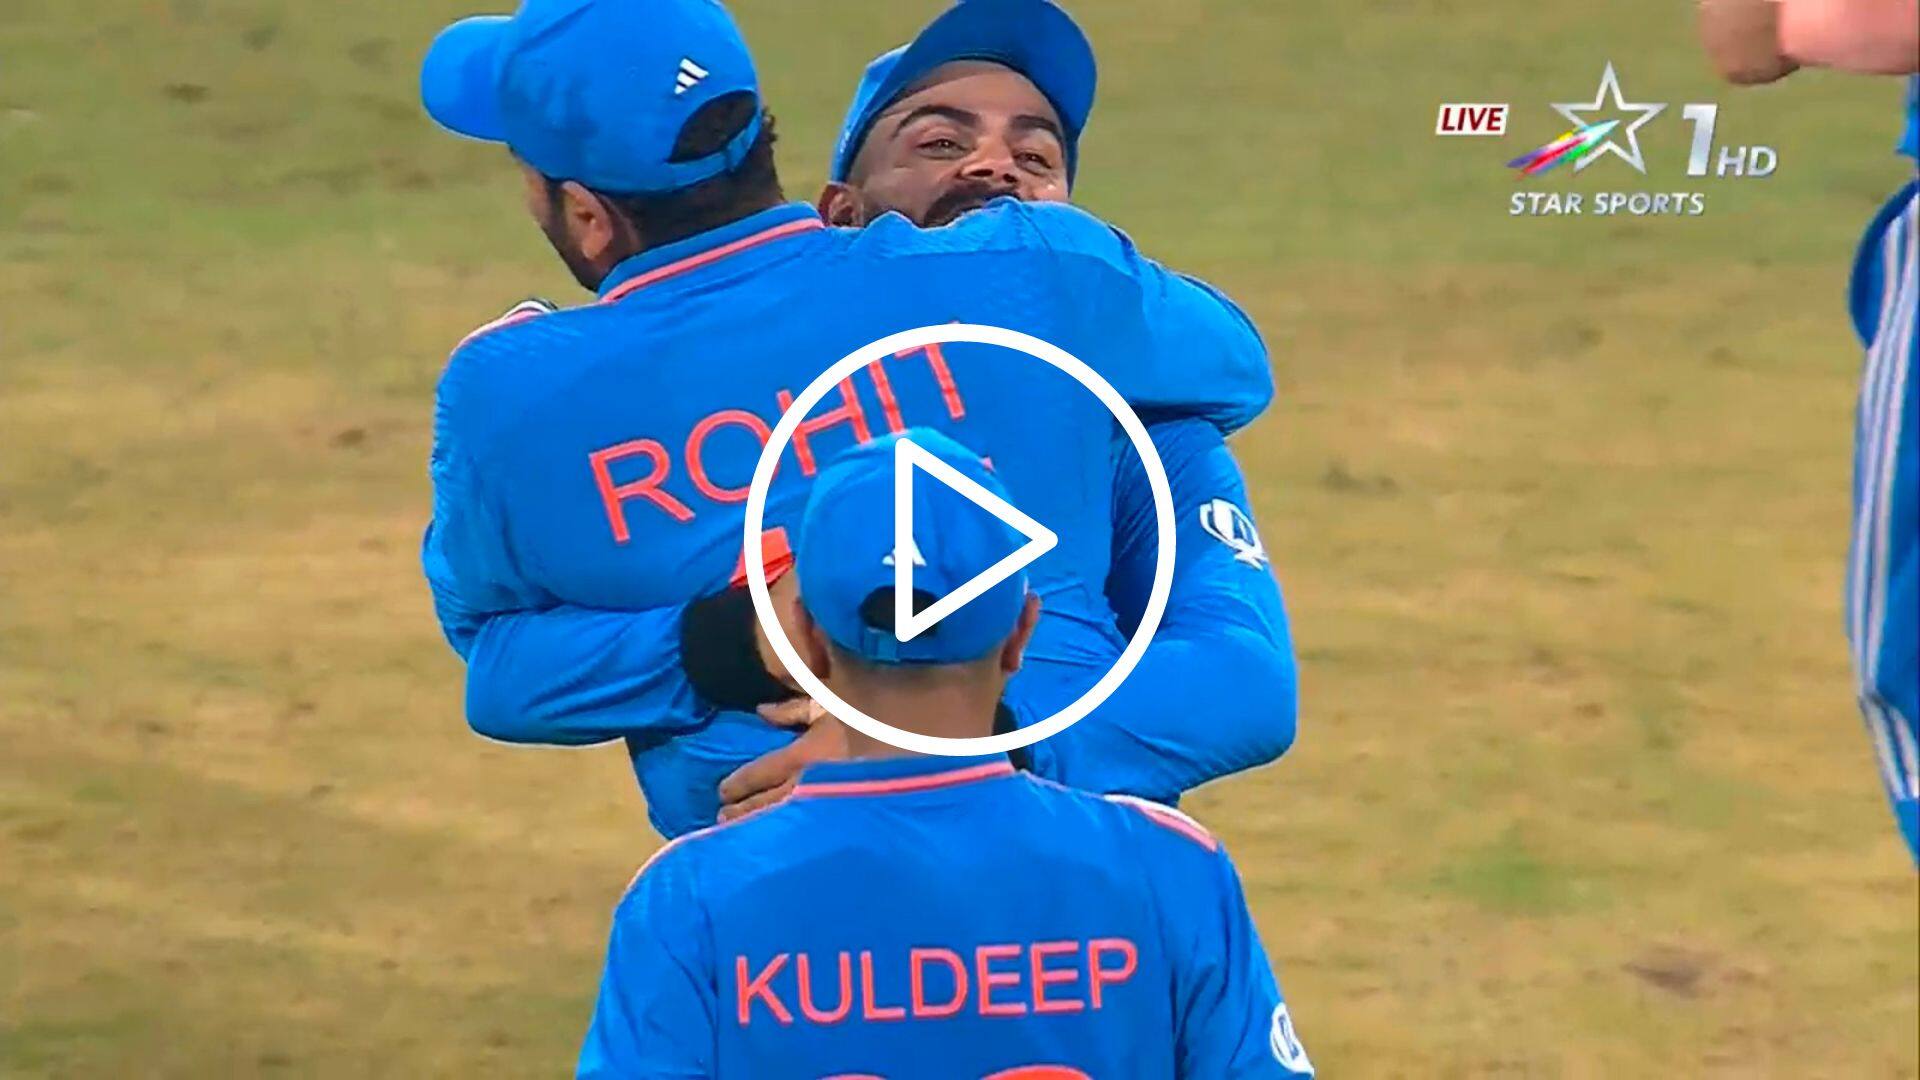 [Watch] Rohit Sharma And Virat Kohli Hug Each Other During IND vs ENG Clash